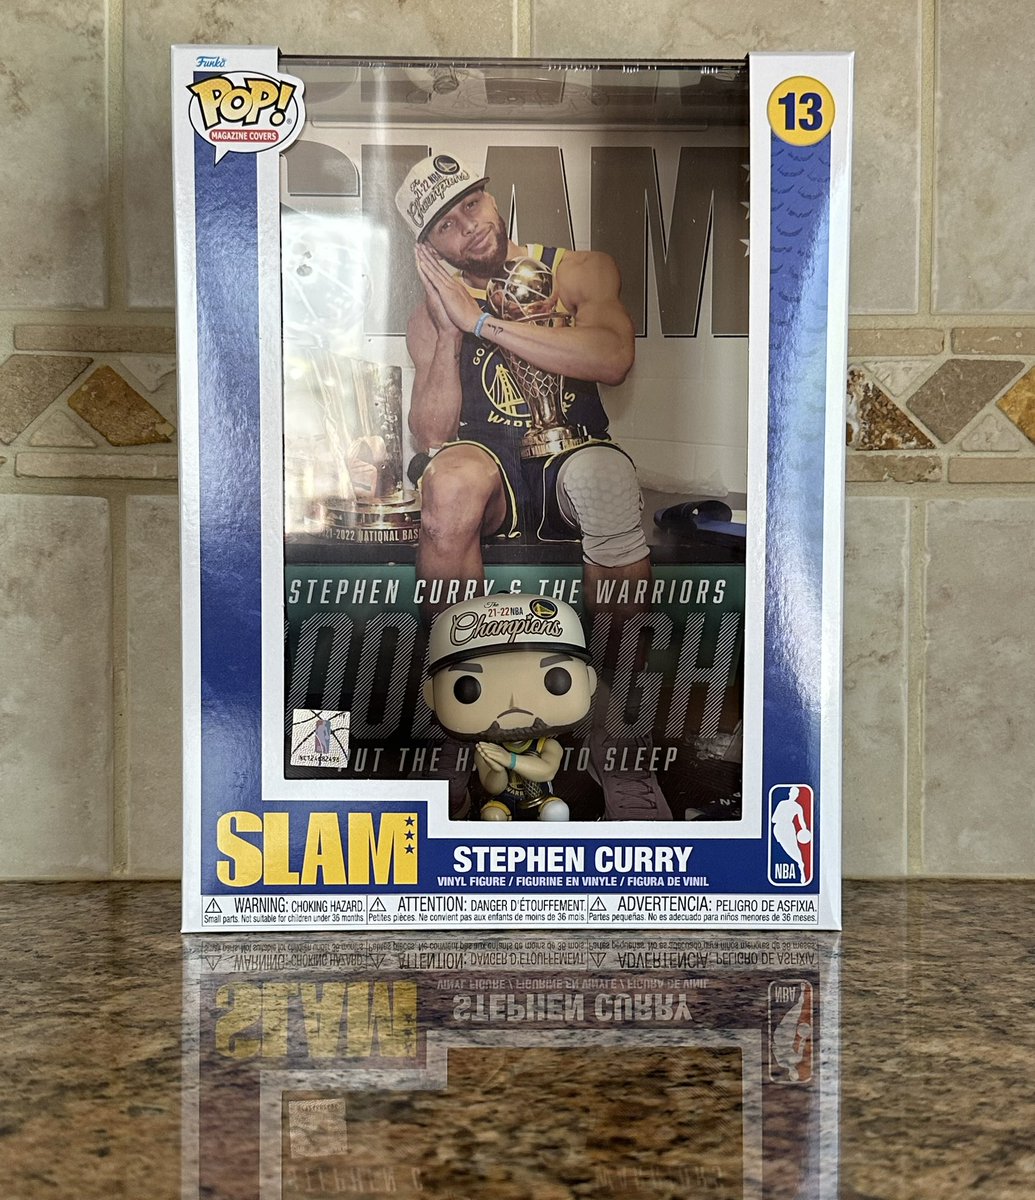 Picked up the Stephen Curry NBA Pop Magazine Cover!
.
#NBA  #GoldenStateWarriors #Warriors #Basketball #StephCurry #StephenCurry #Magazine #Funko #Collectibles #DisTrackers